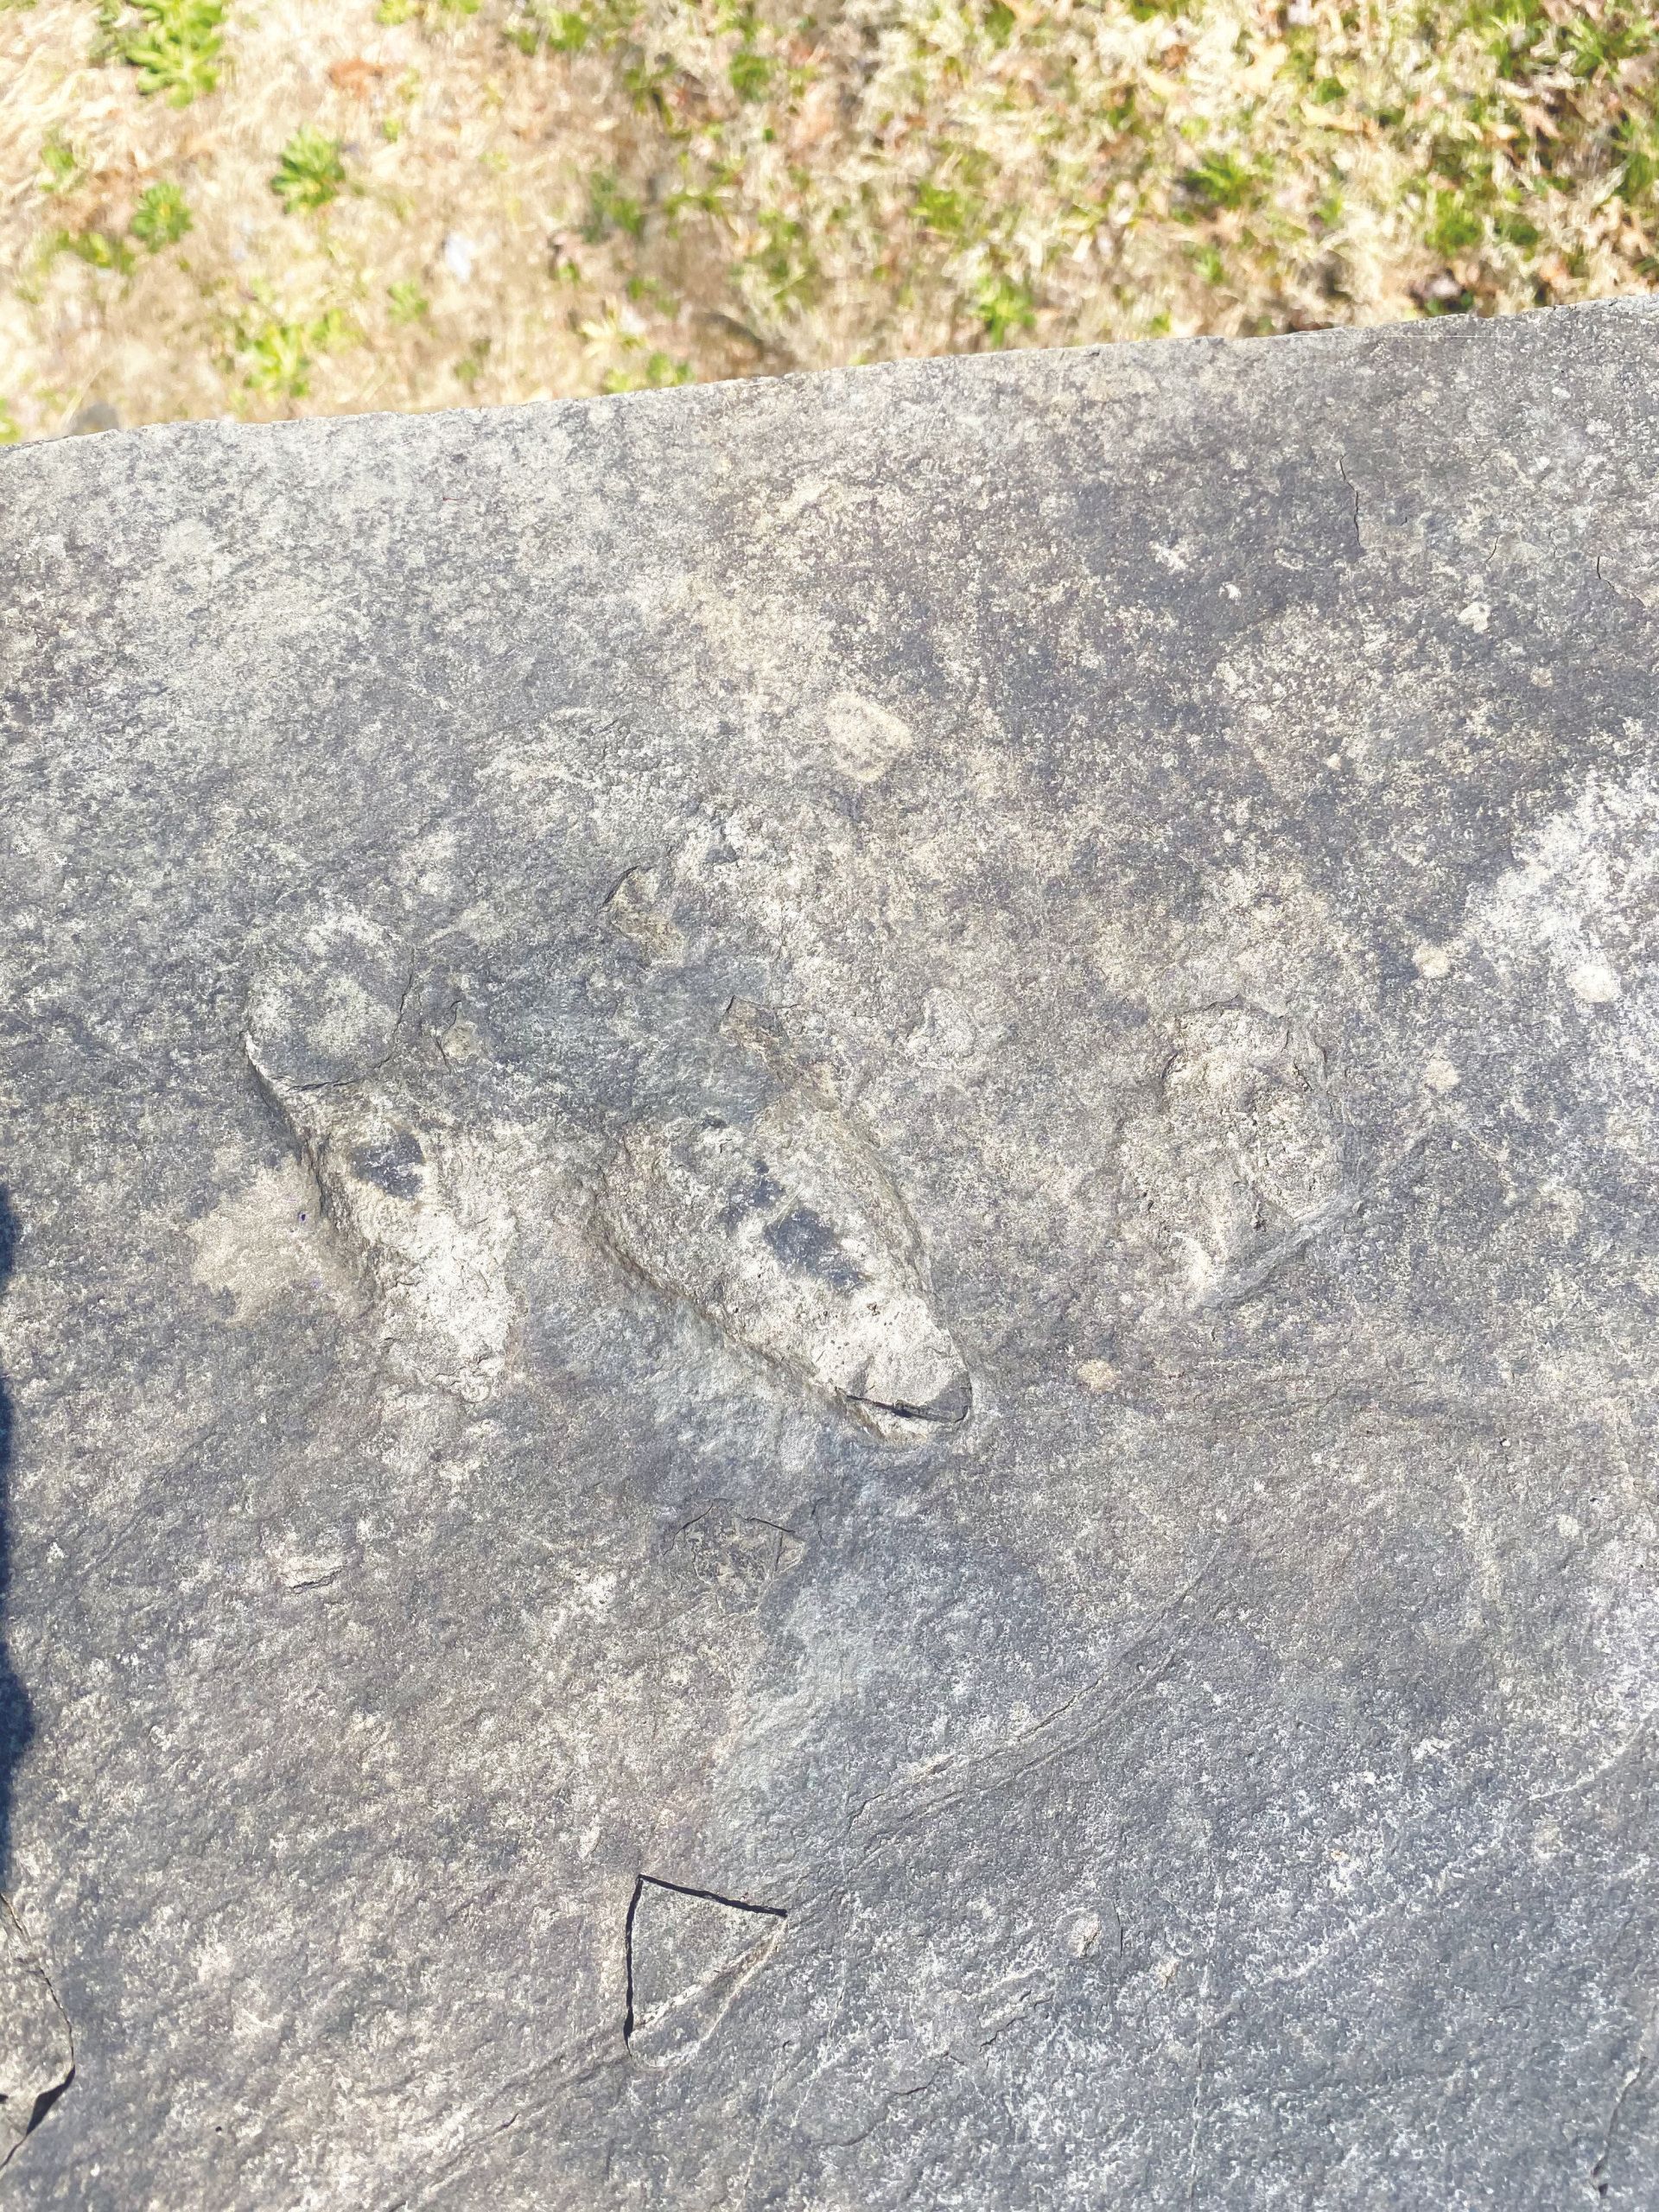 a close up of a rock with a footprint on it .